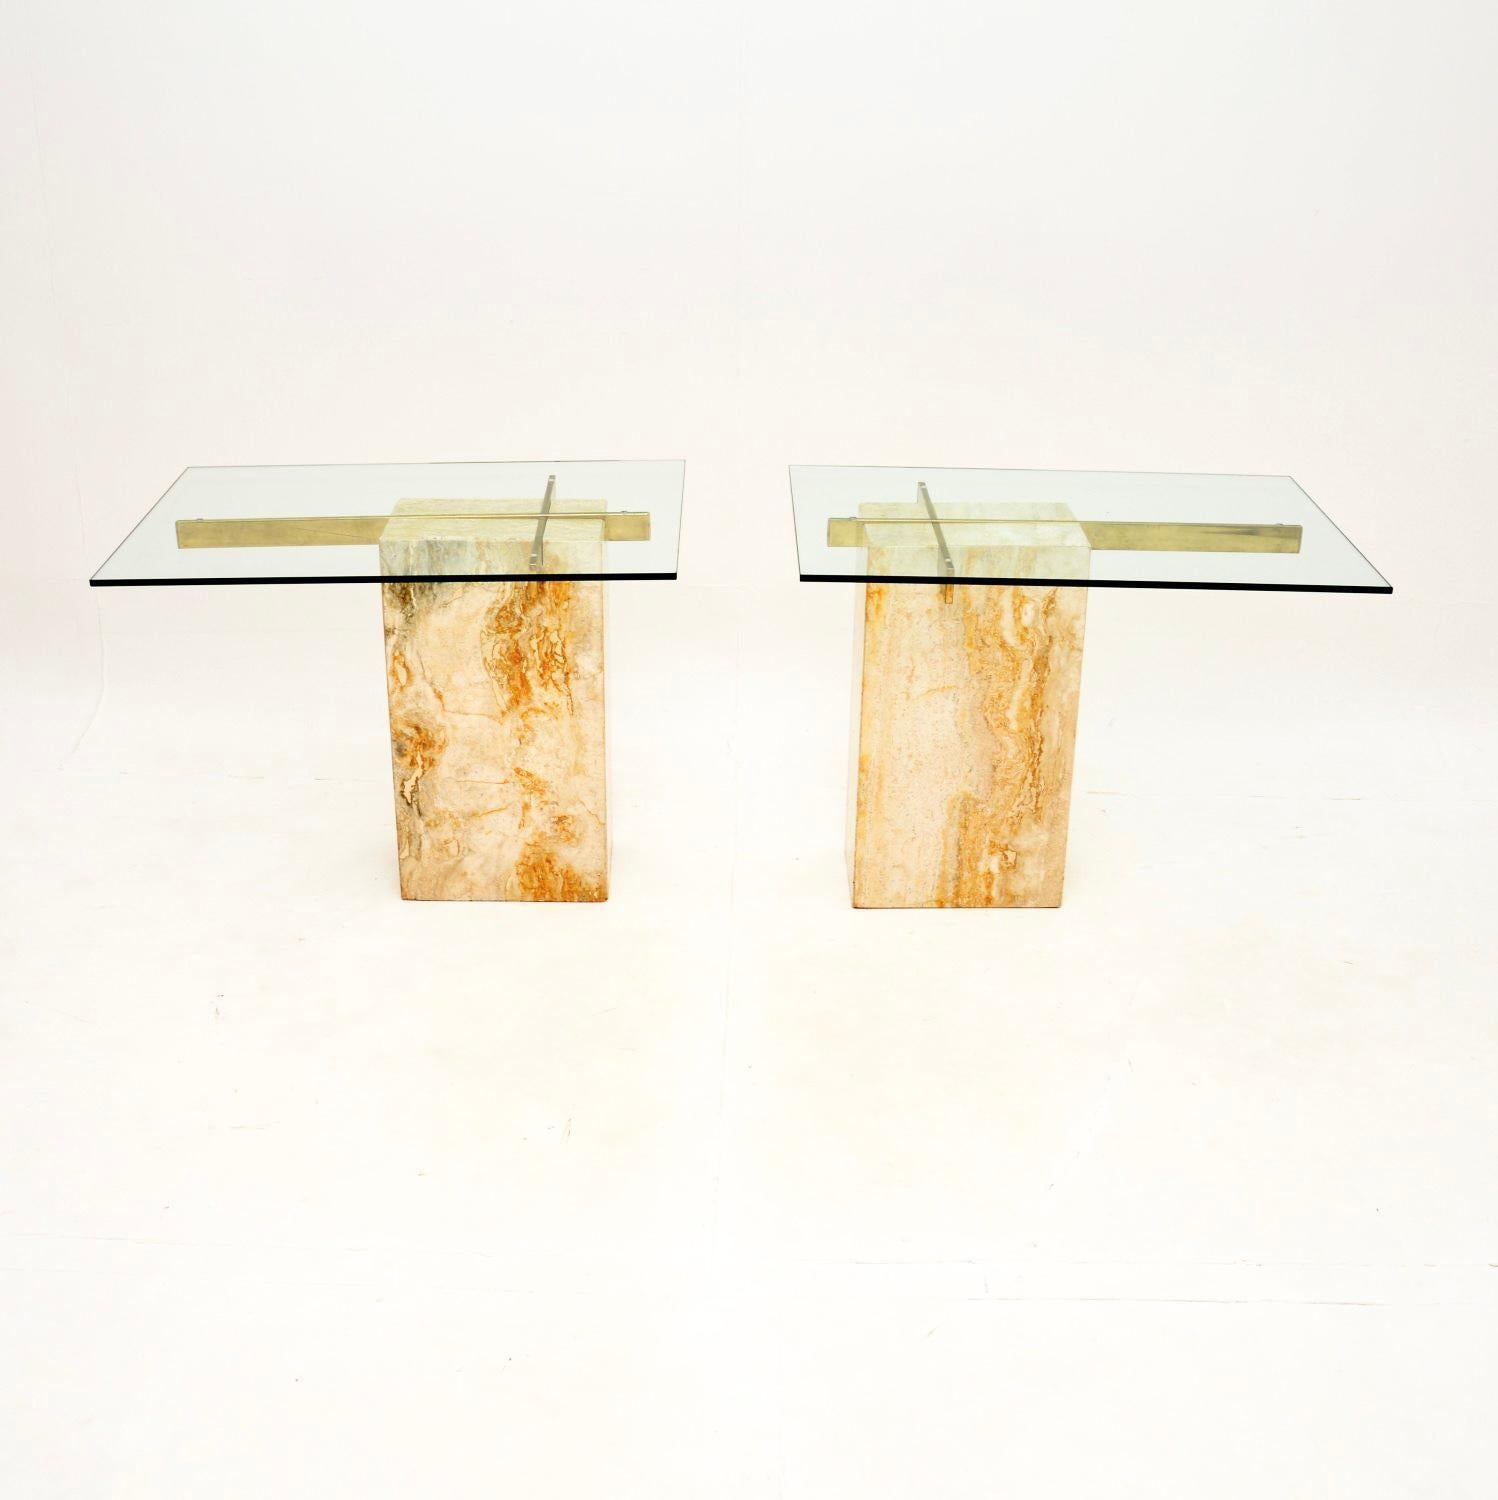 A stunning pair of vintage Italian travertine and brass side tables by Artedi. They were made in Italy, they date from the 1970’s.

The quality is exceptional and this is a very rare model. They are a useful size, perfect as end tables and have